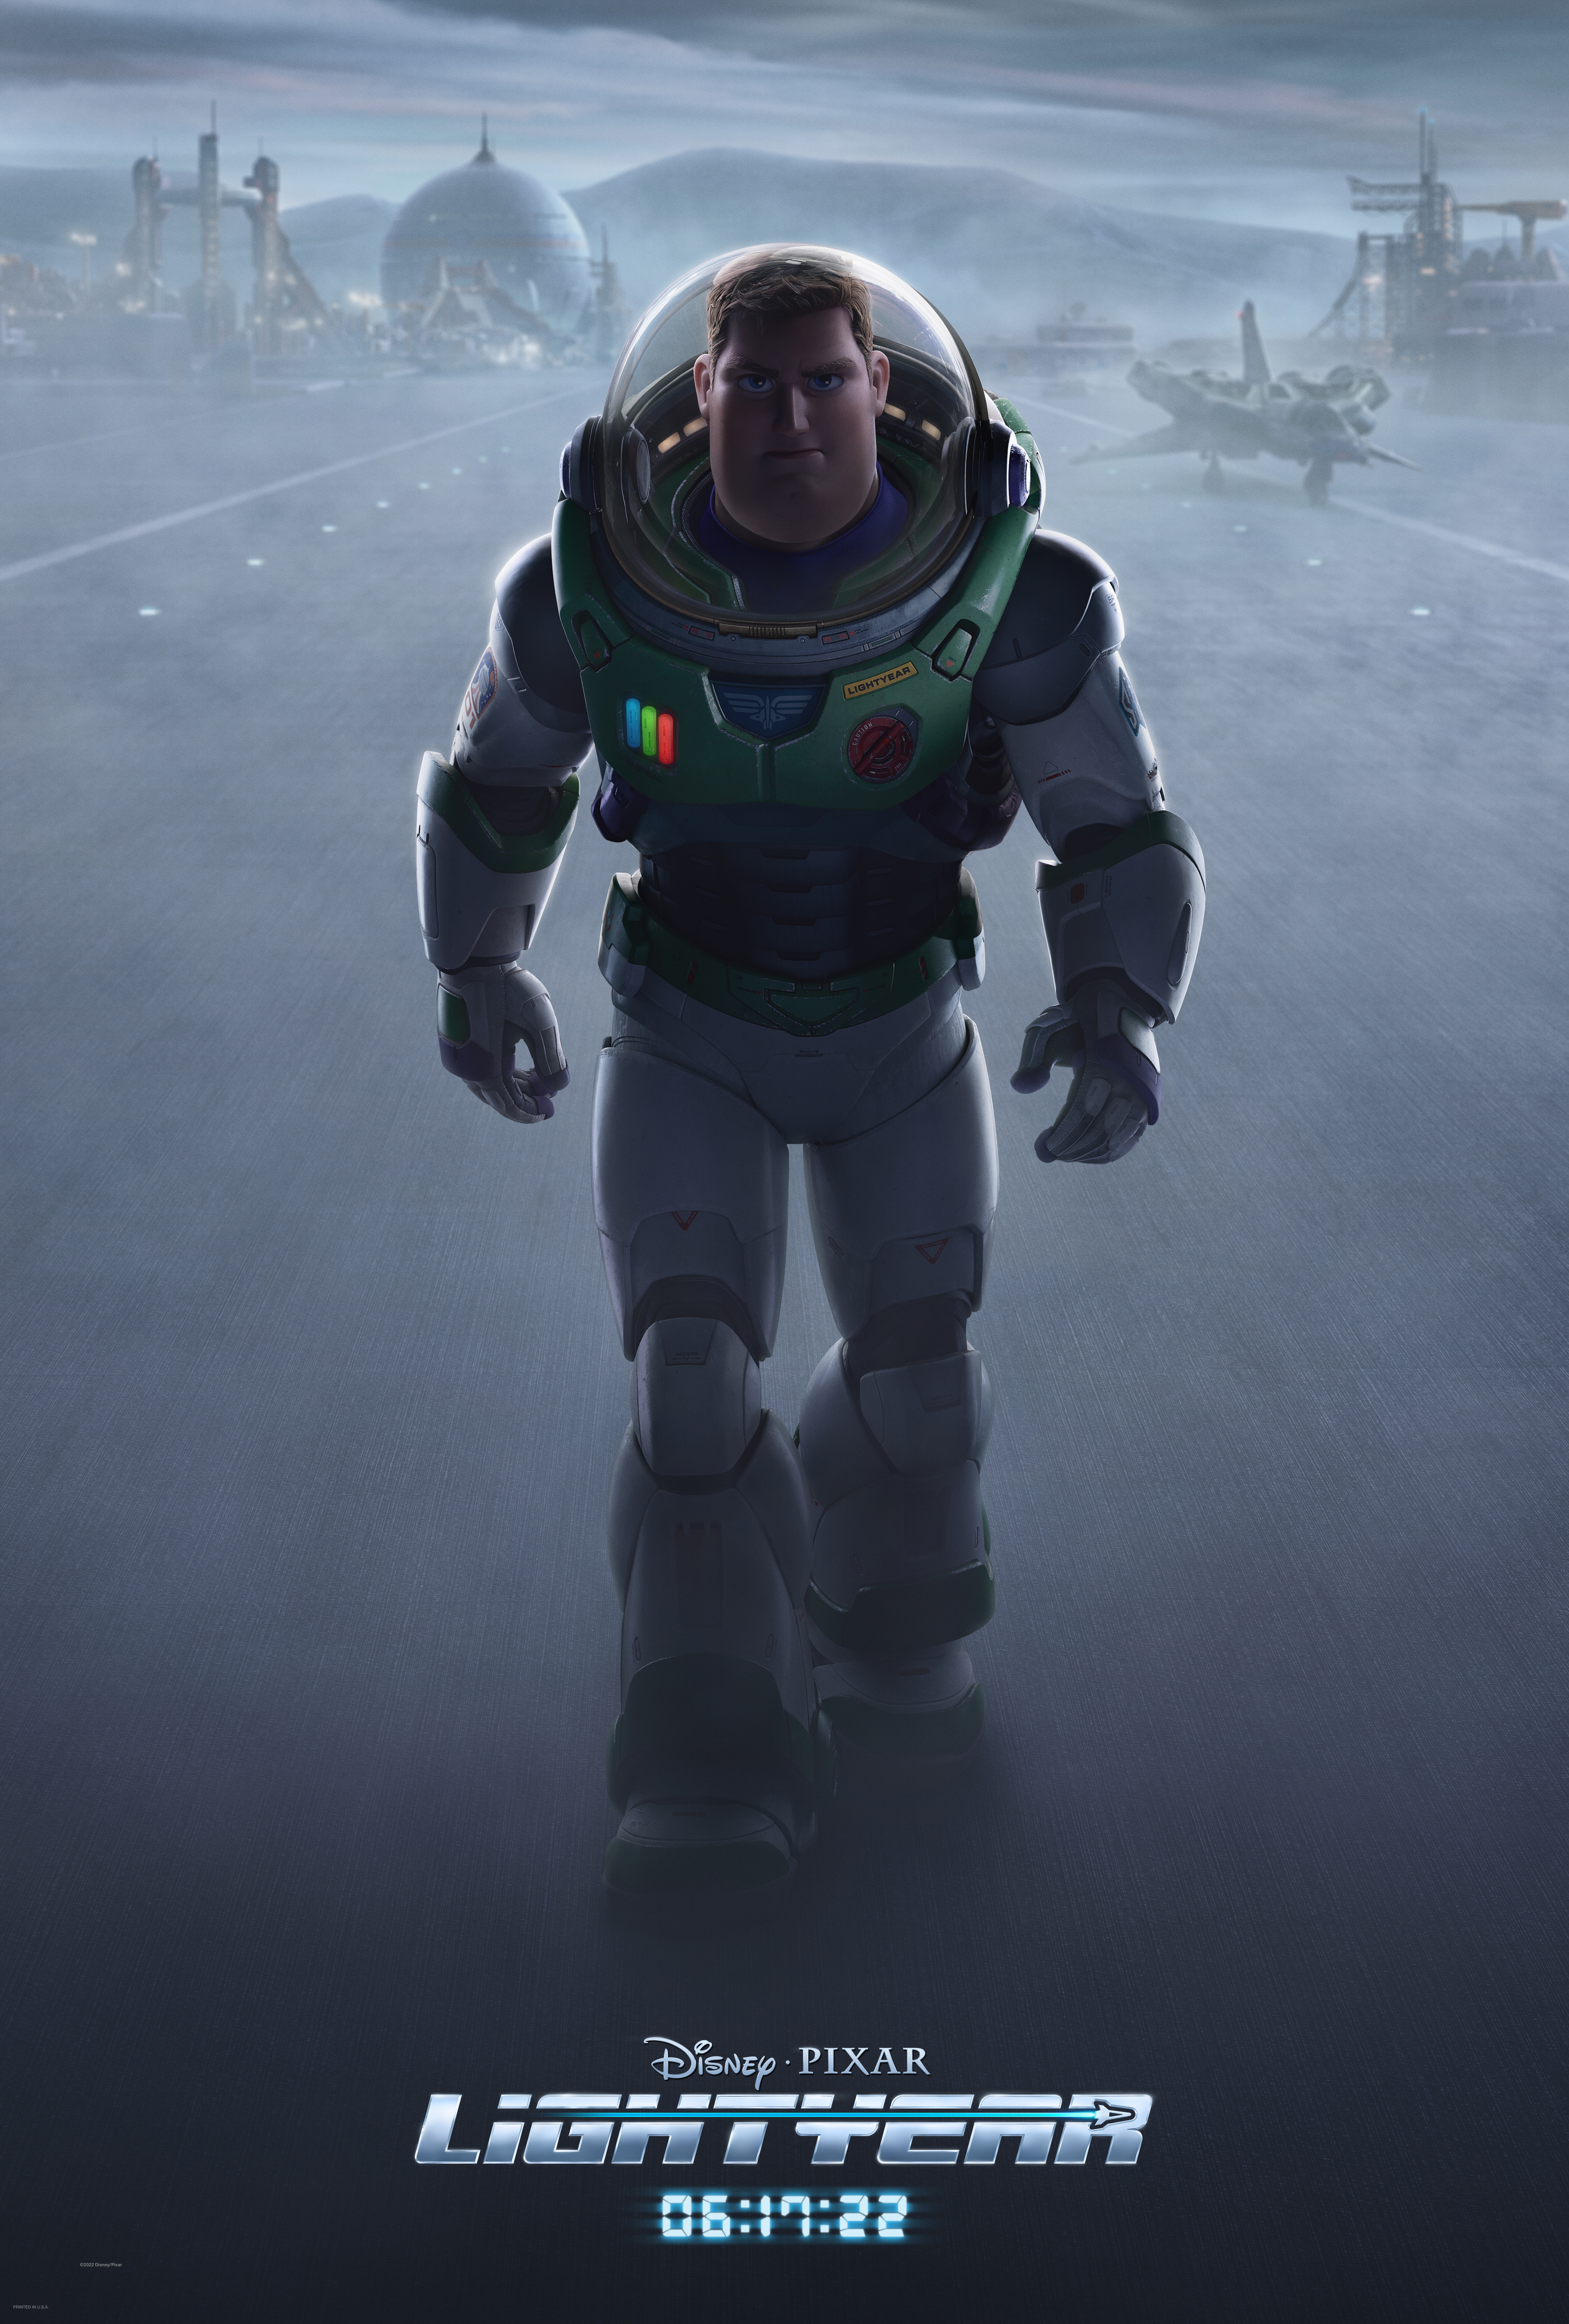 New Movie Trailer and Poster Image for Disney Pixar's Lightyear